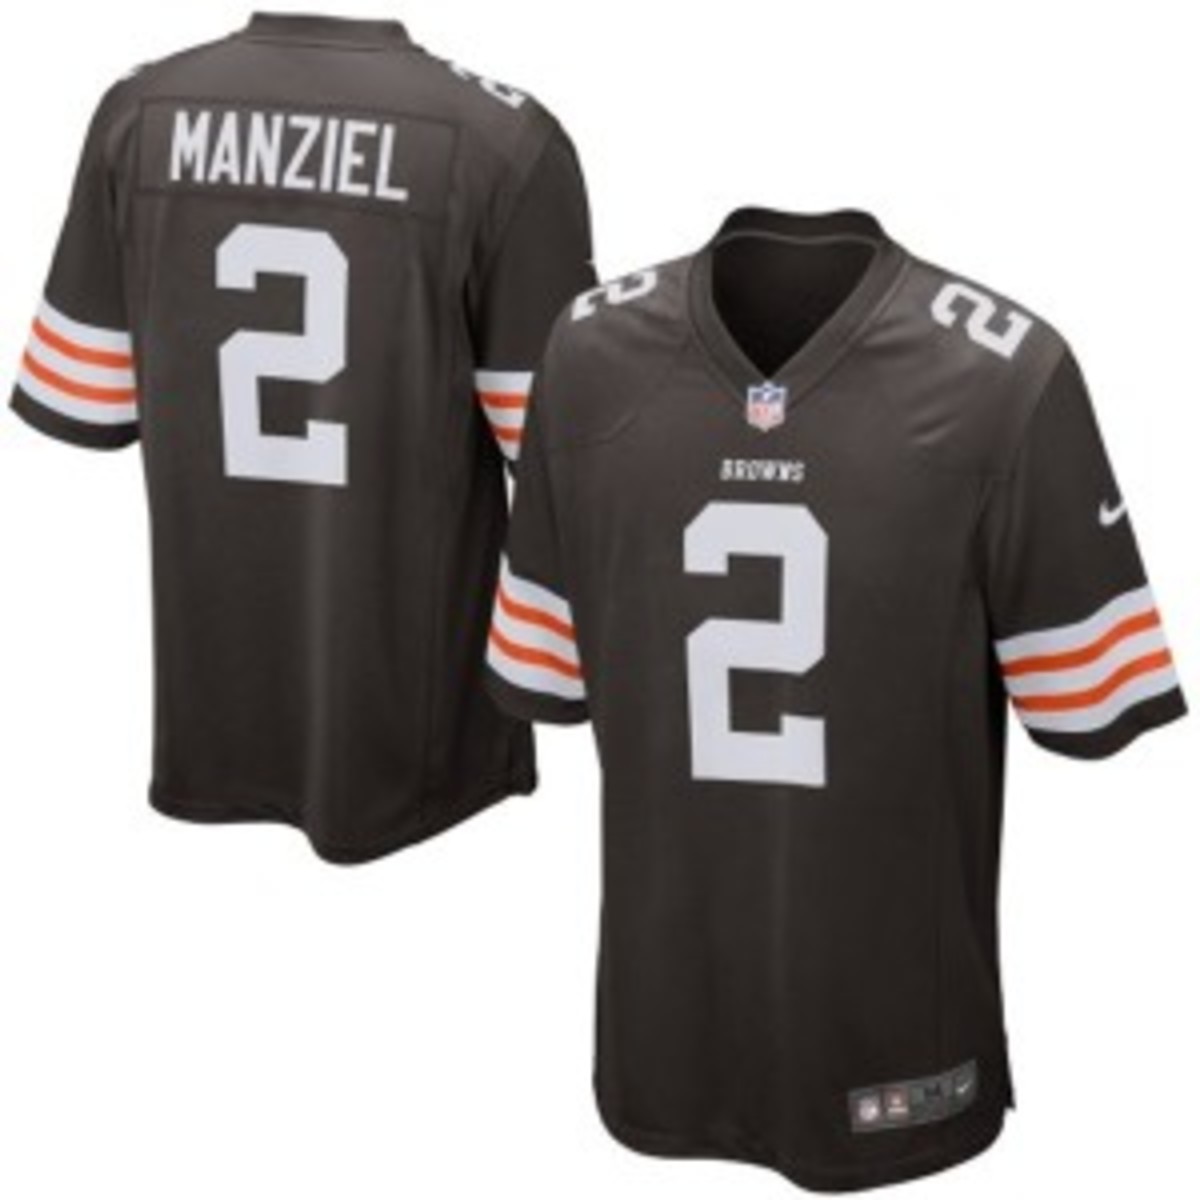 Johnny Manziel’s Browns jersey is among the best sellers in the NFL heading into the 2014 season. 